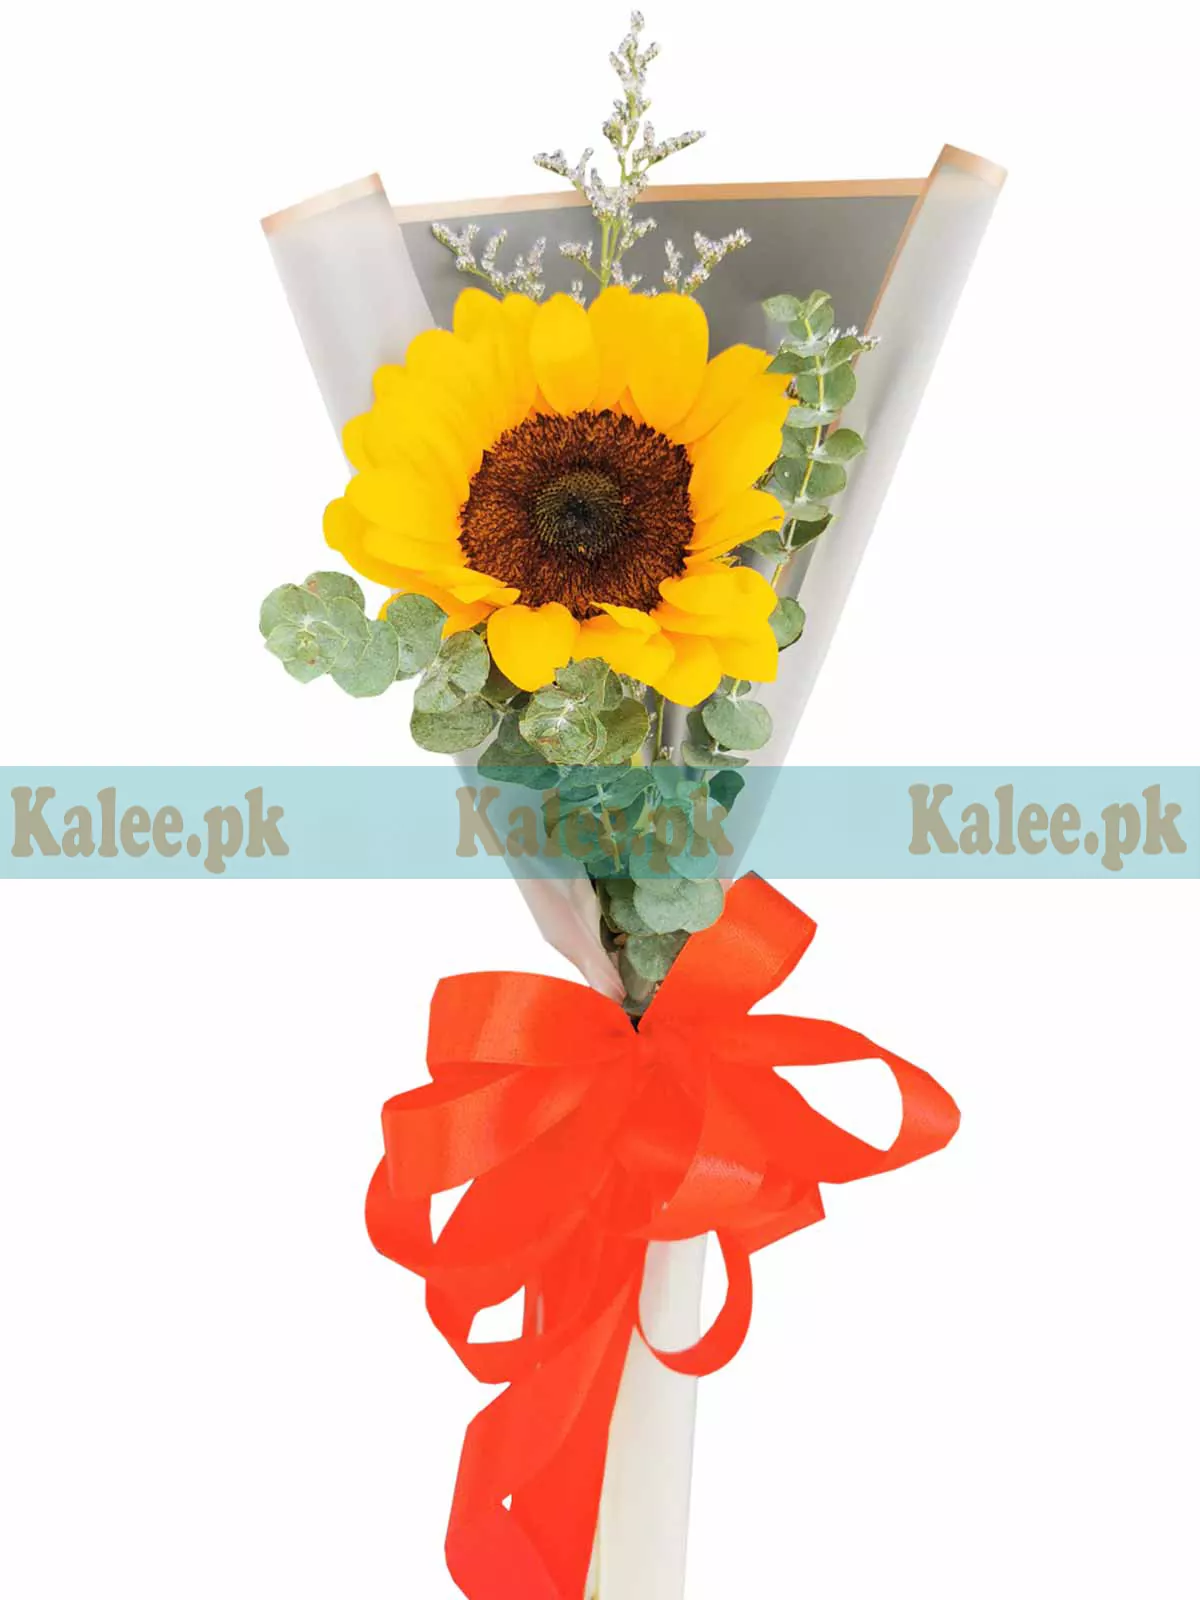 A single sunflower presented in chic and stylish wrapping.